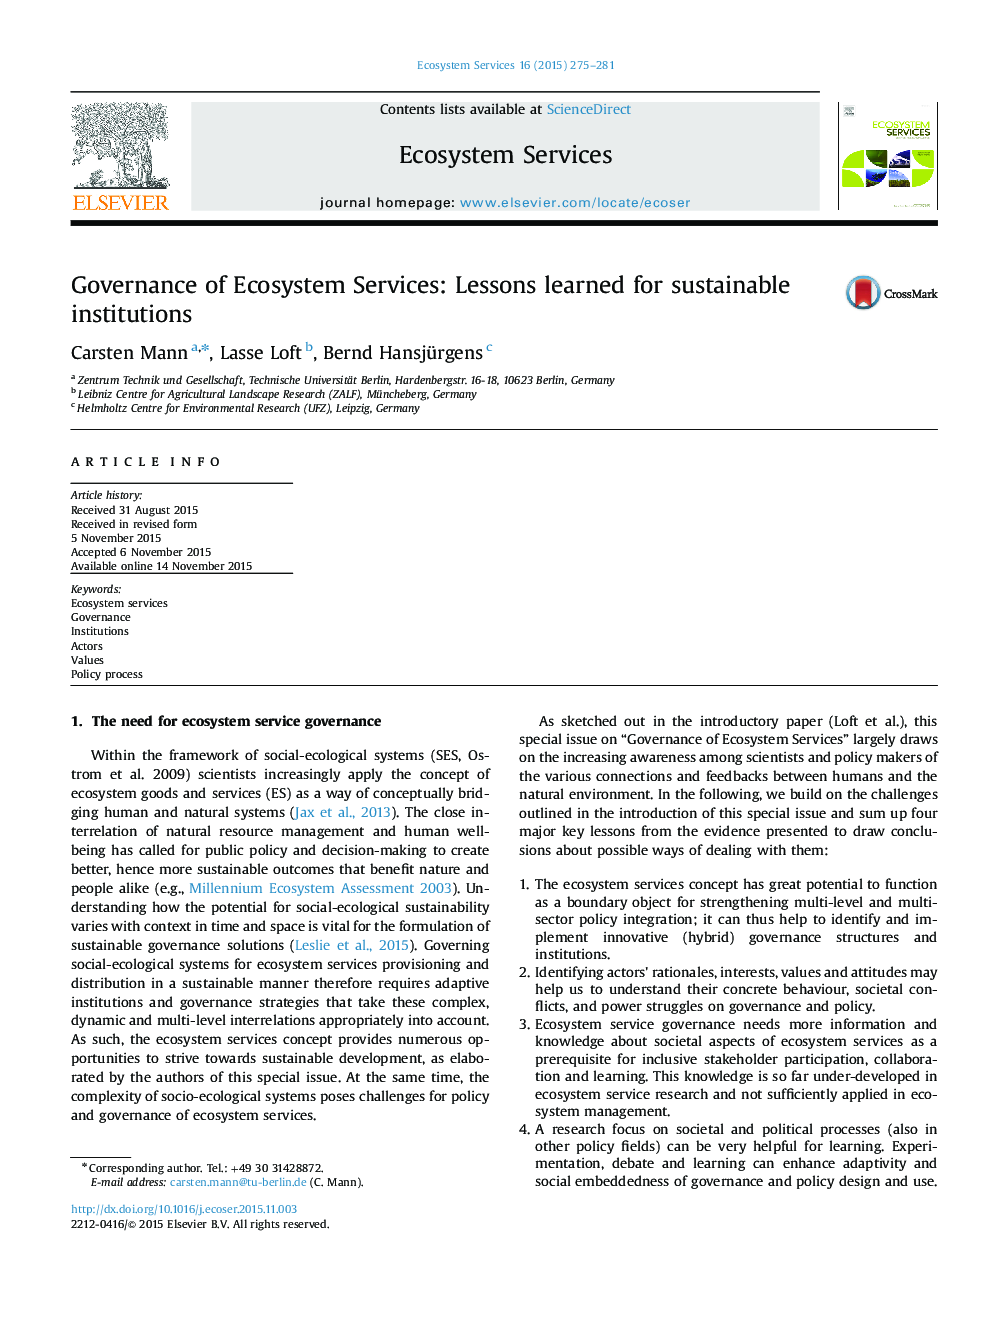 Governance of Ecosystem Services: Lessons learned for sustainable institutions